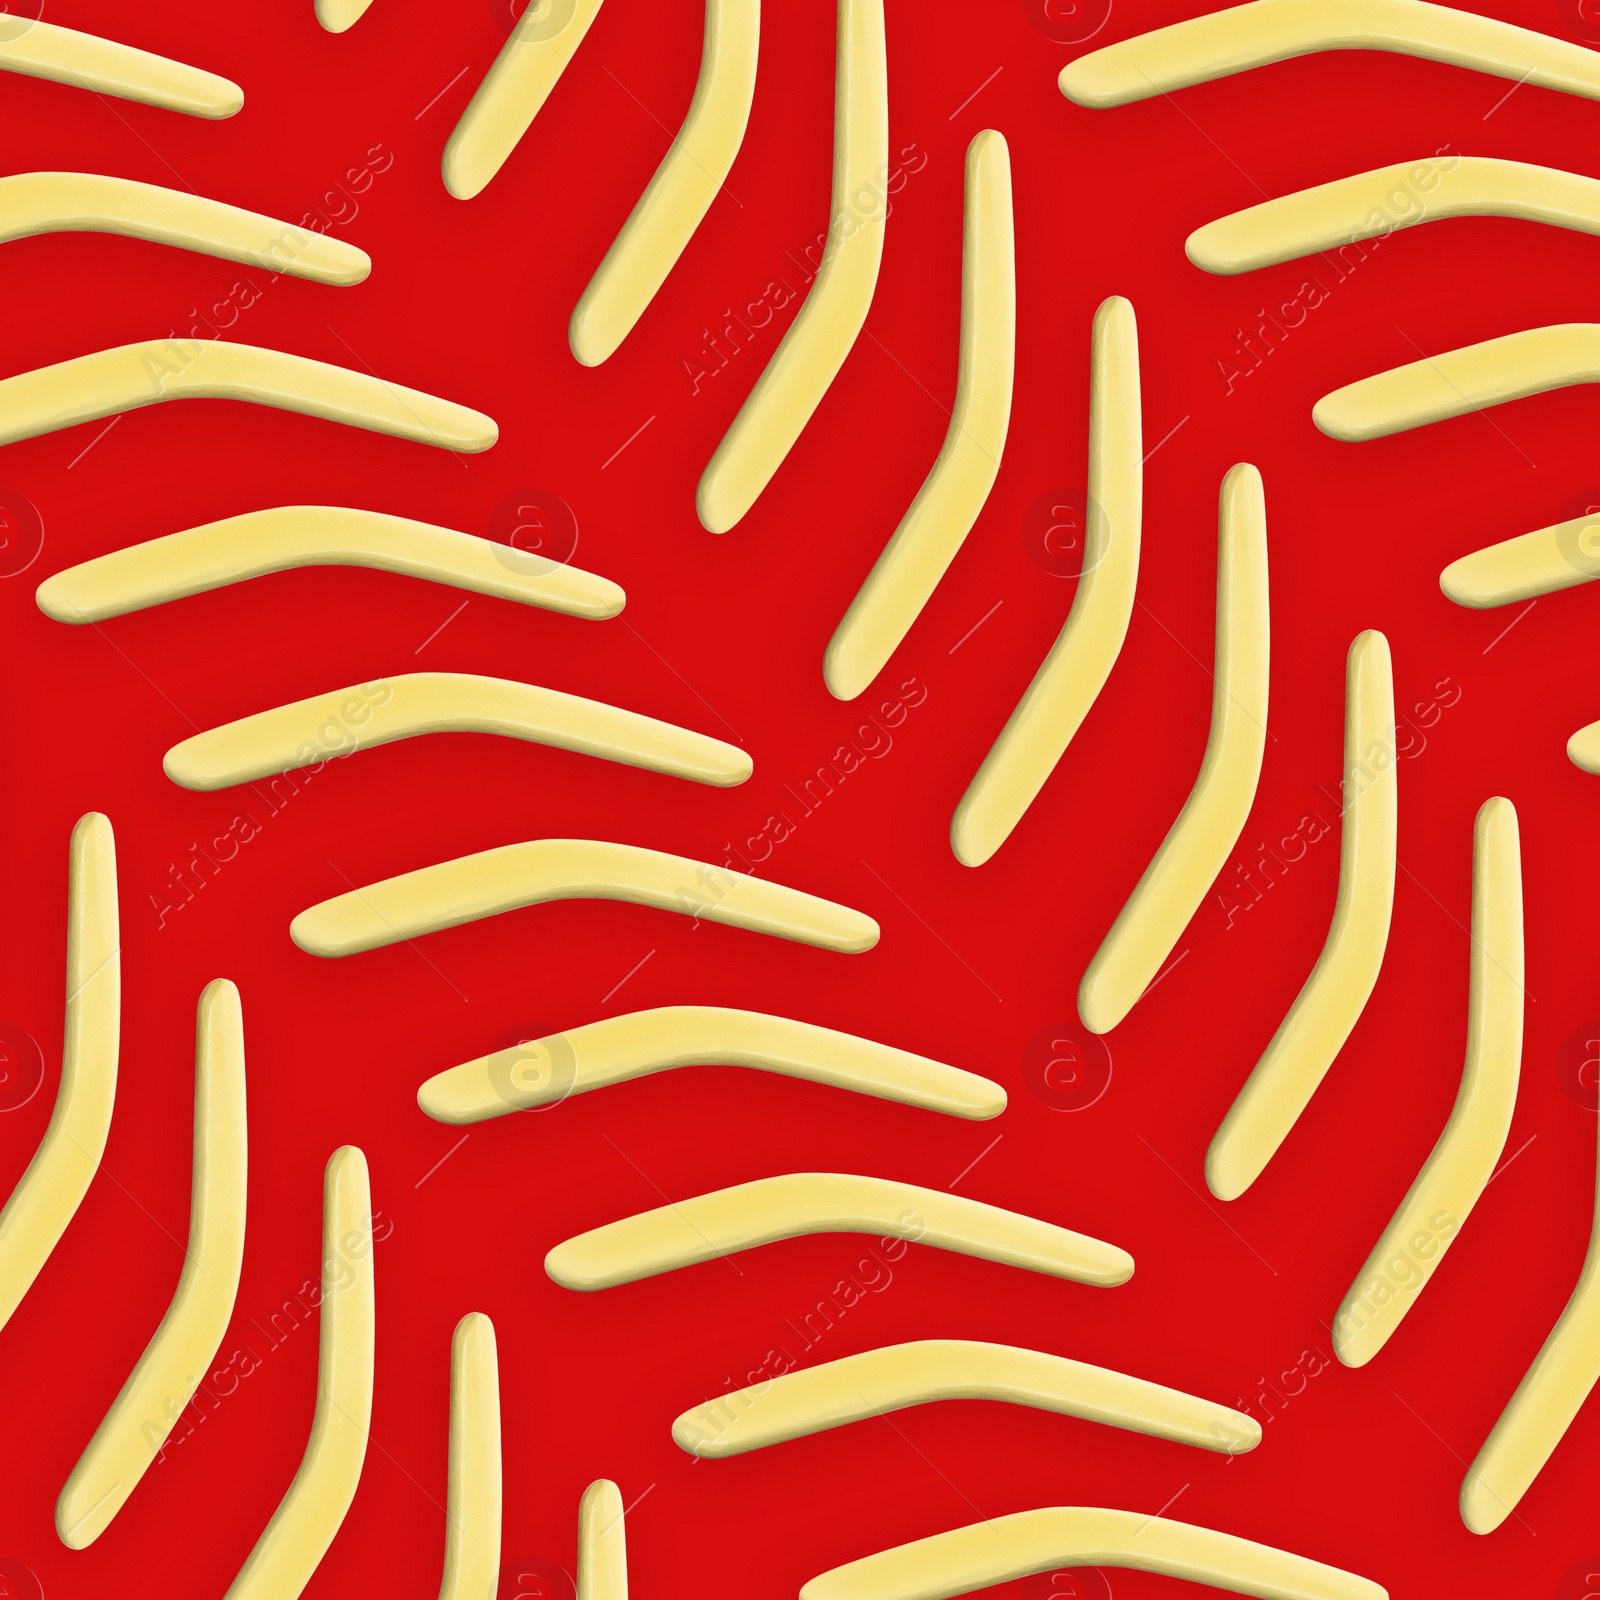 Image of Yellow boomerangs on red background, flat lay